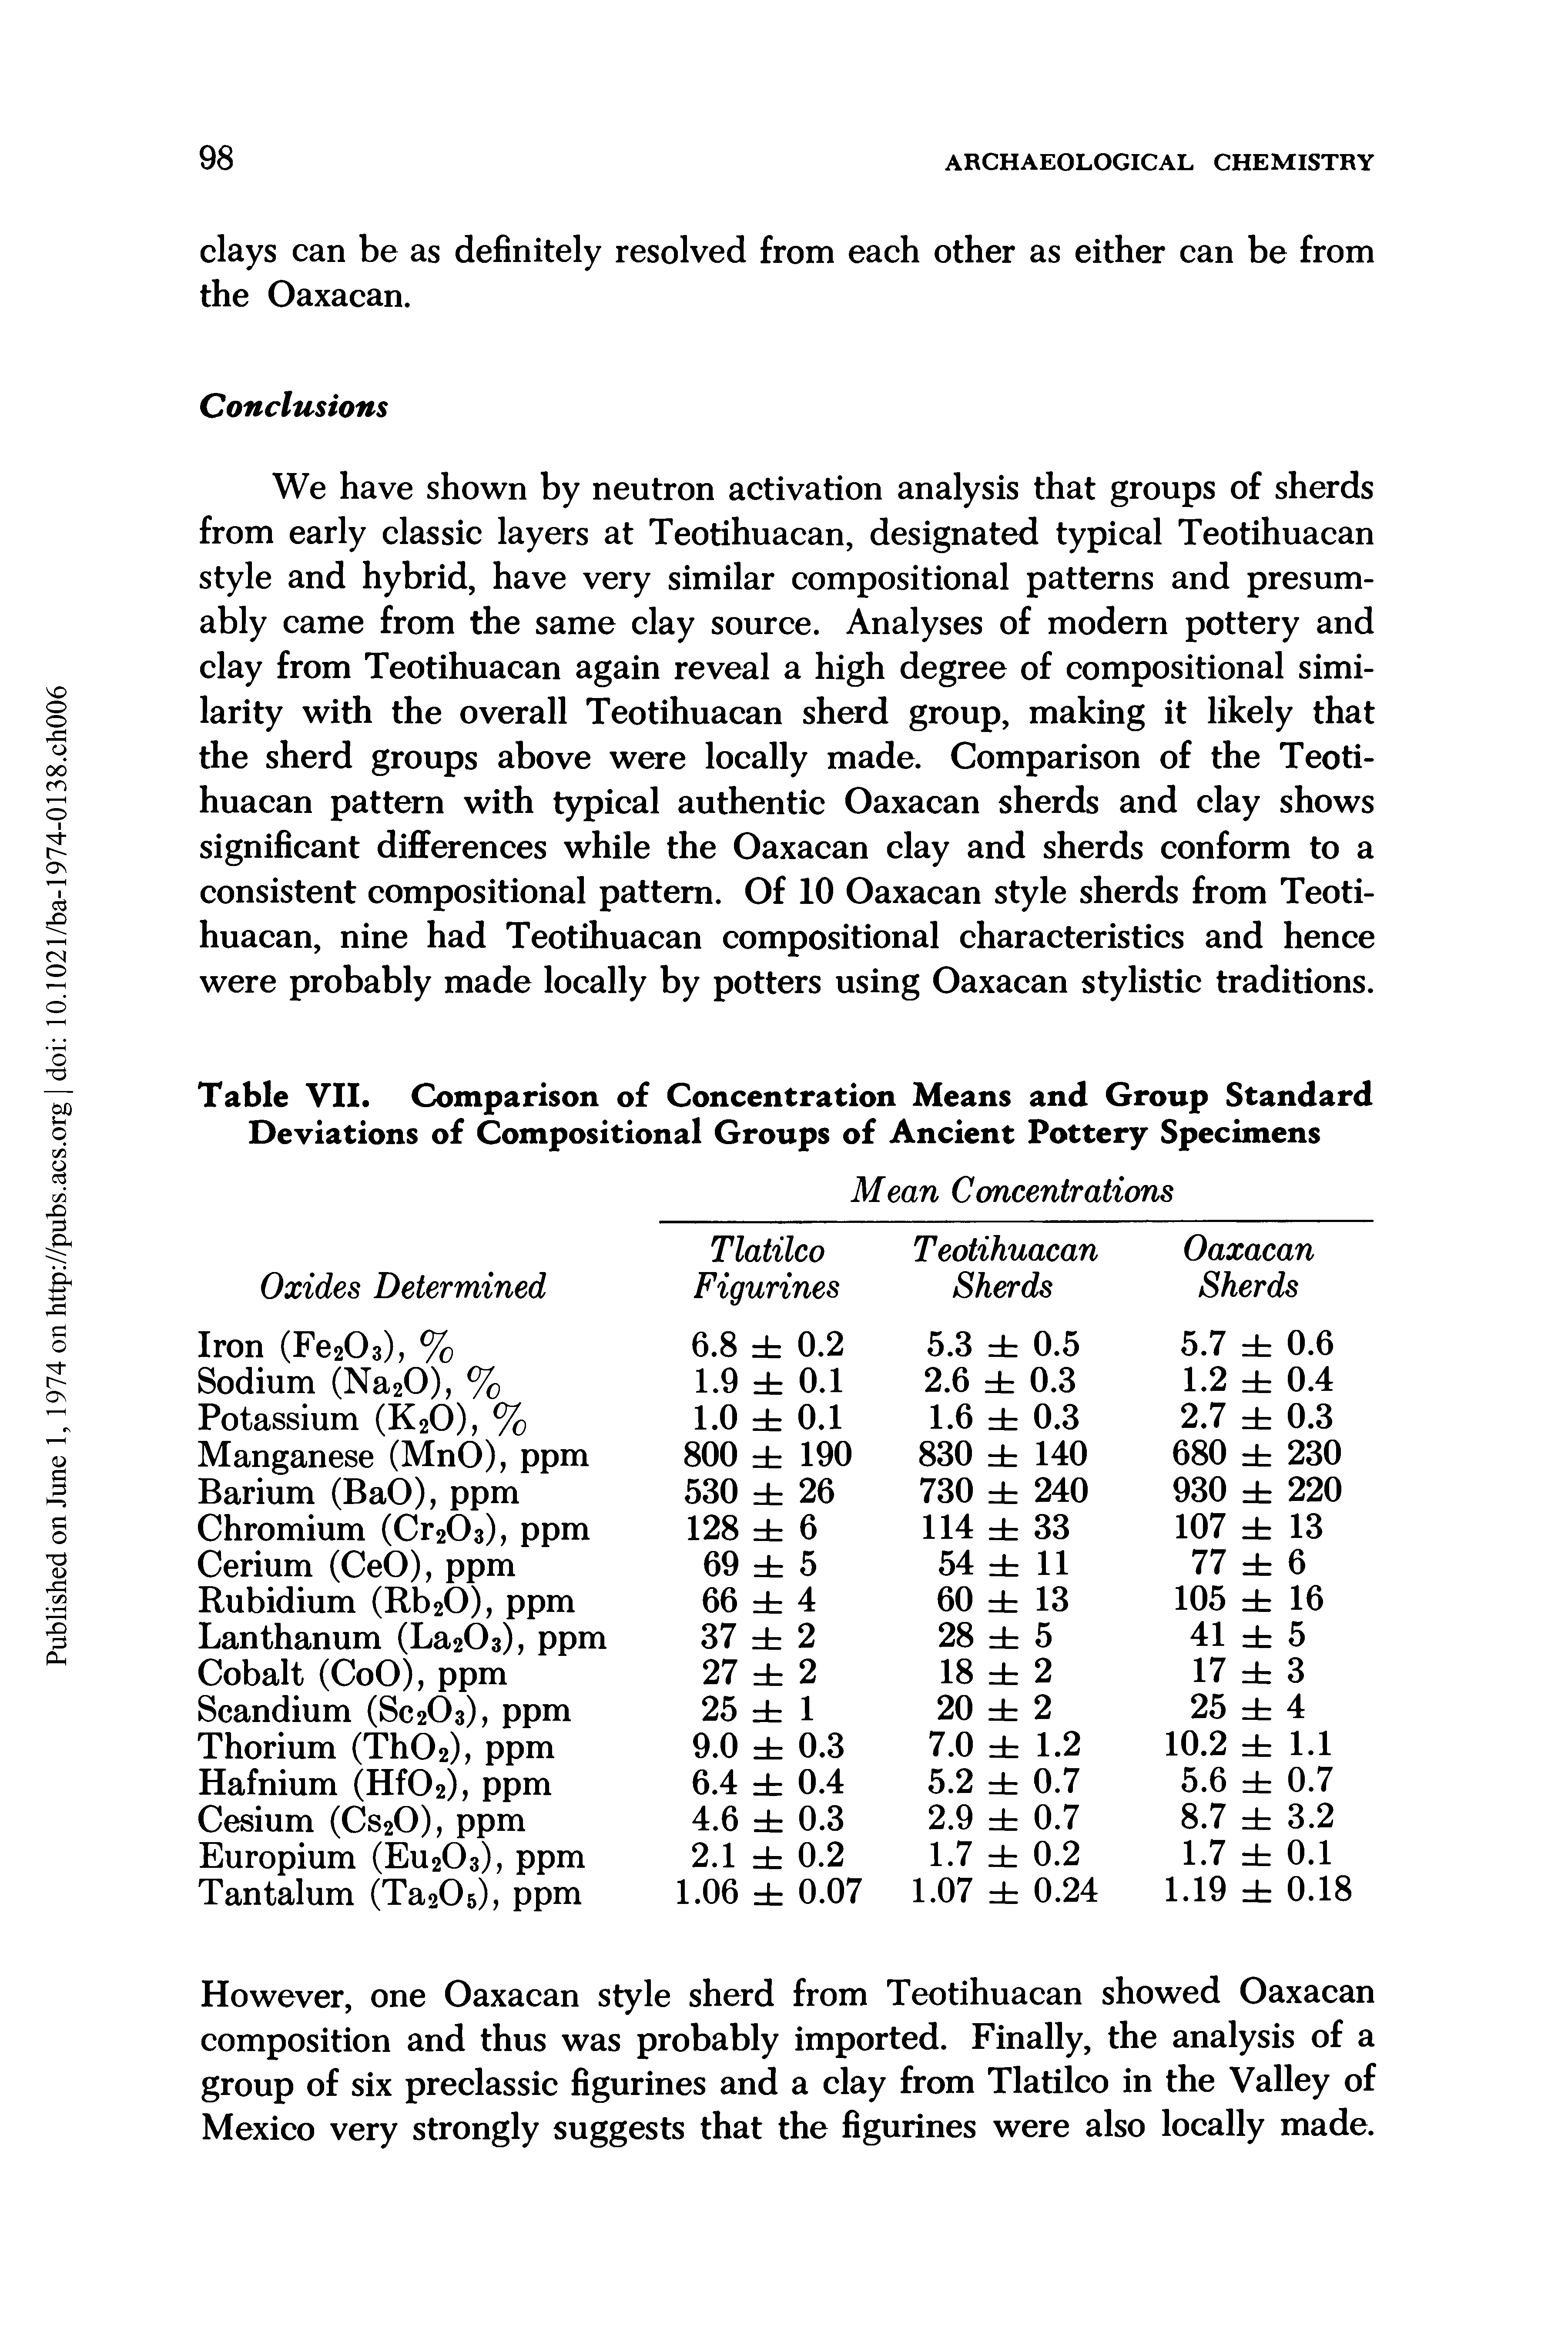 Table VII. Comparison of Concentration Means and Group Standard Deviations of Compositional Groups of Ancient Pottery Specimens...